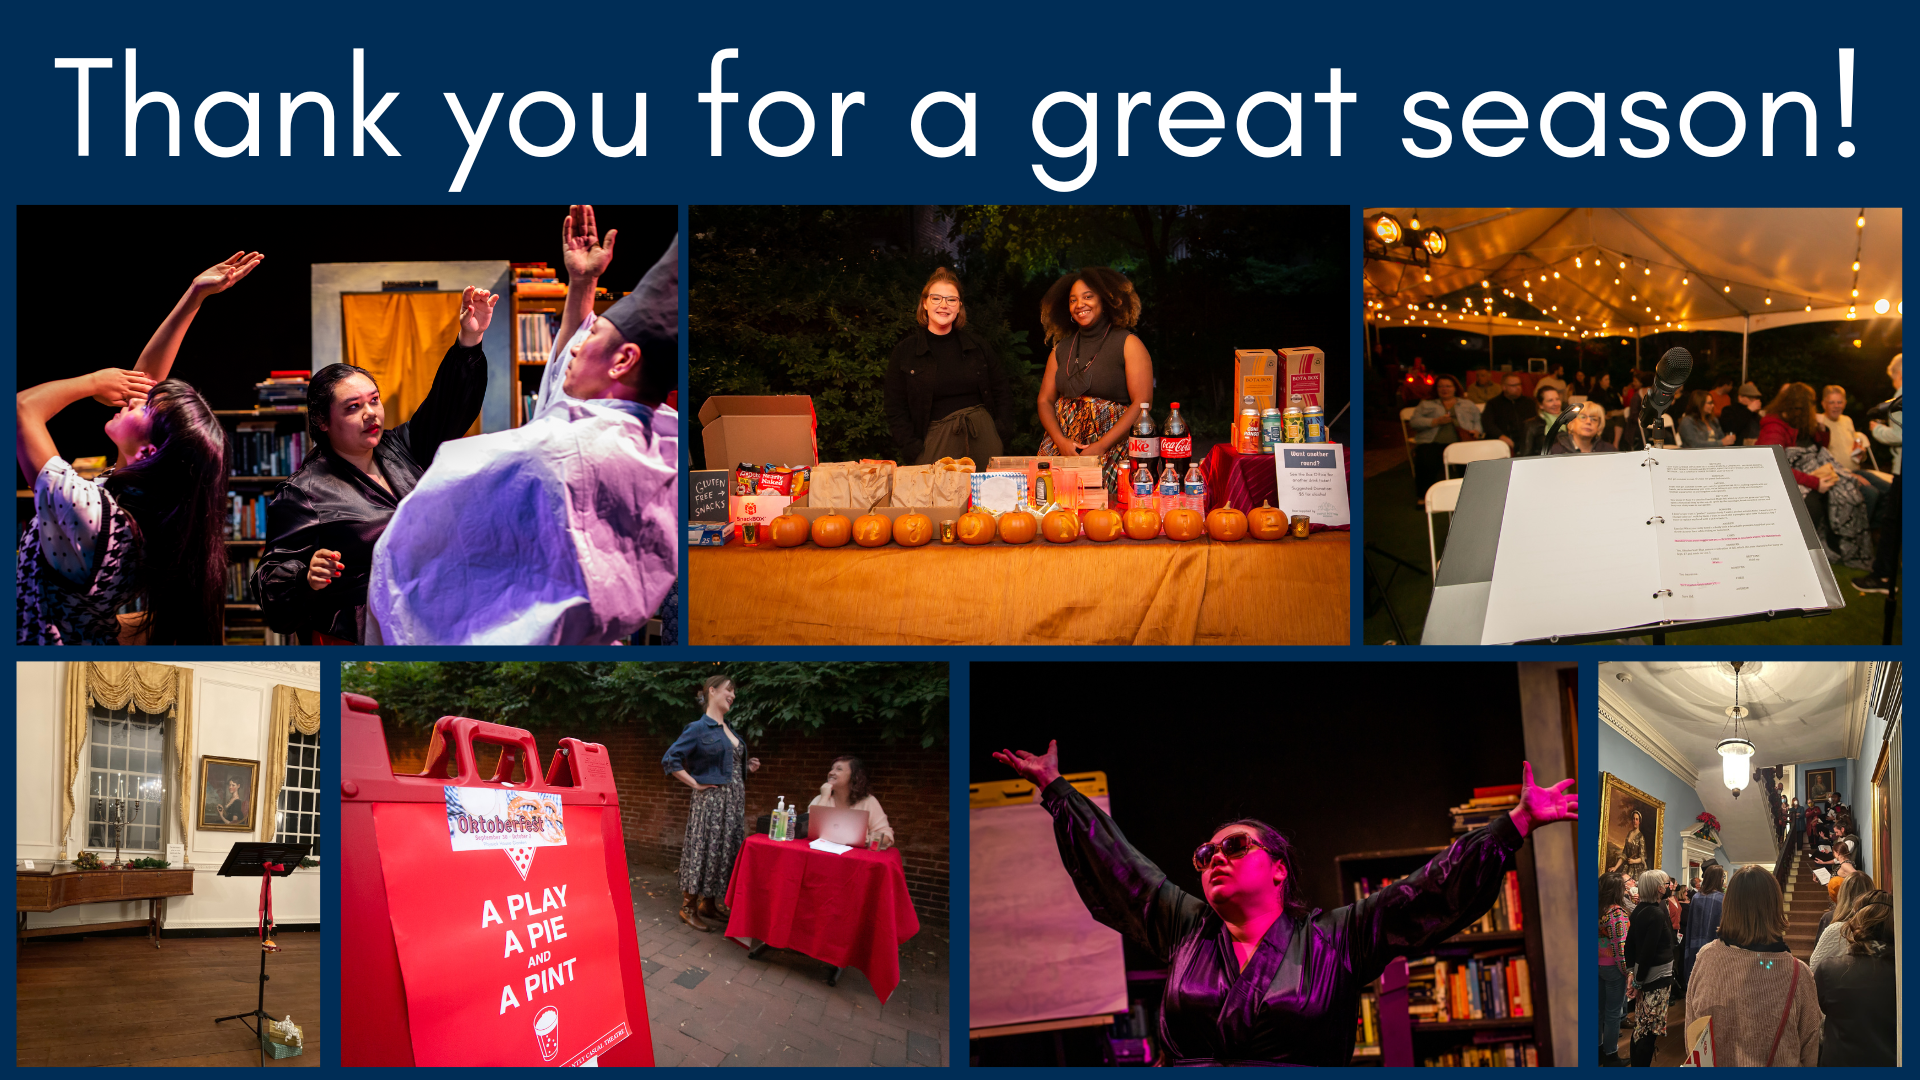 A collection of images from the season's productions with the text "Thank you for a great season!"